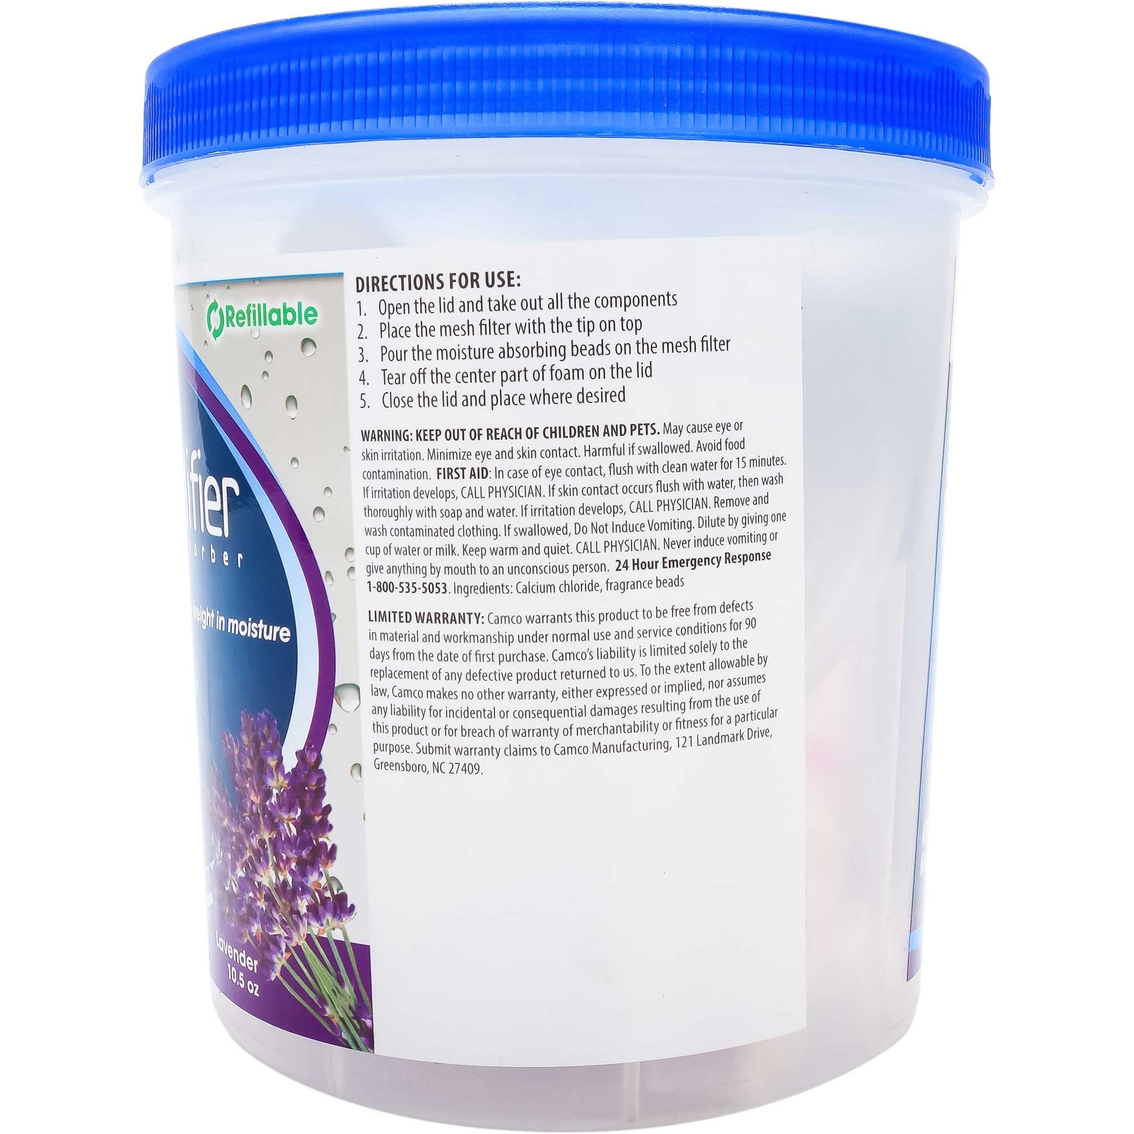 Camco Lavender Refillable Moisture Absorber - Image 2 of 5